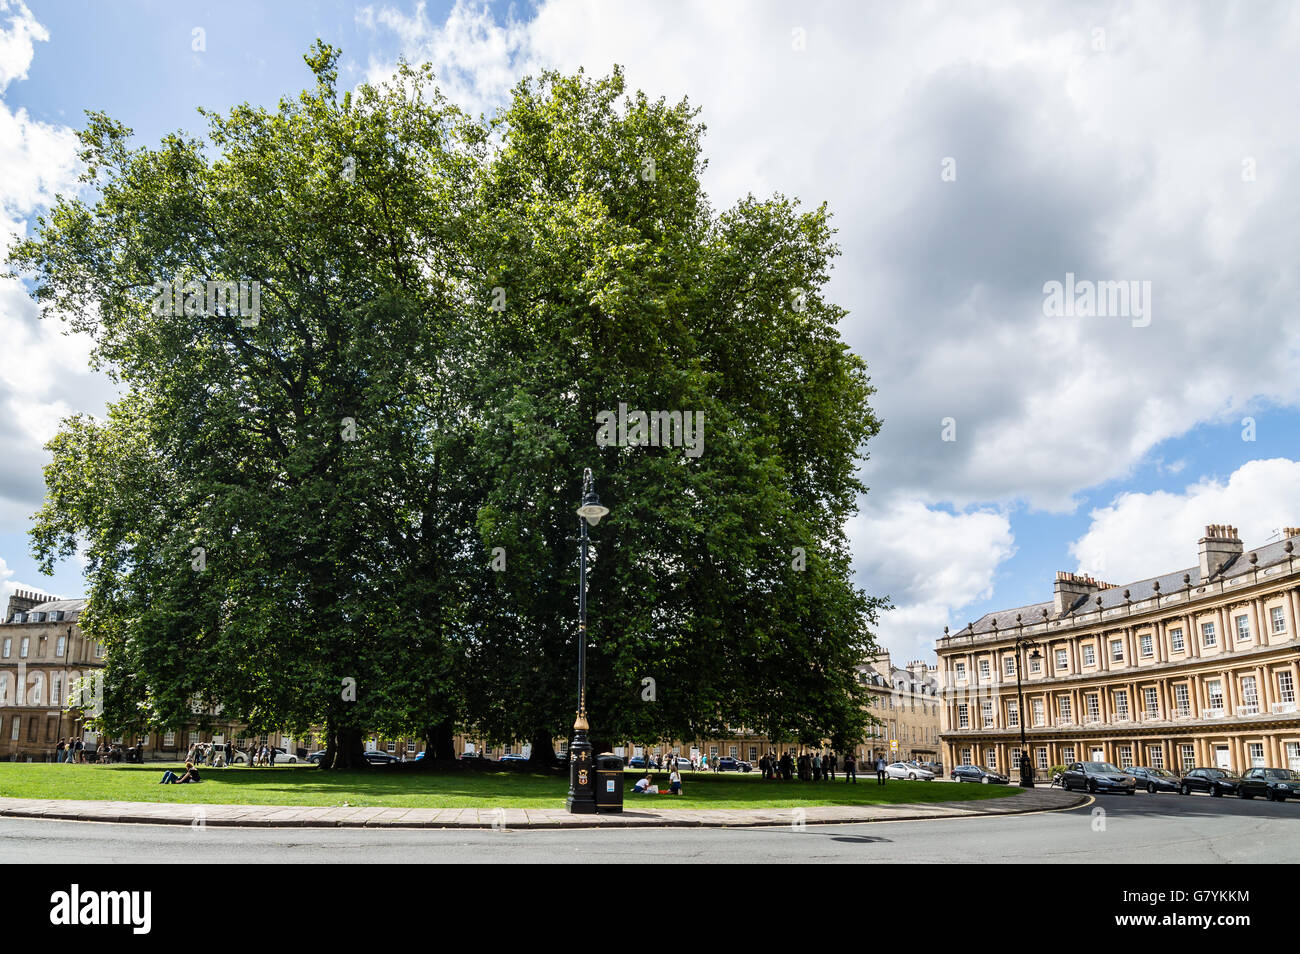 Bath, UK - August 15, 2015: The famous Circus buildingIt is an example of Georgian architecture in the city of Bath Stock Photo